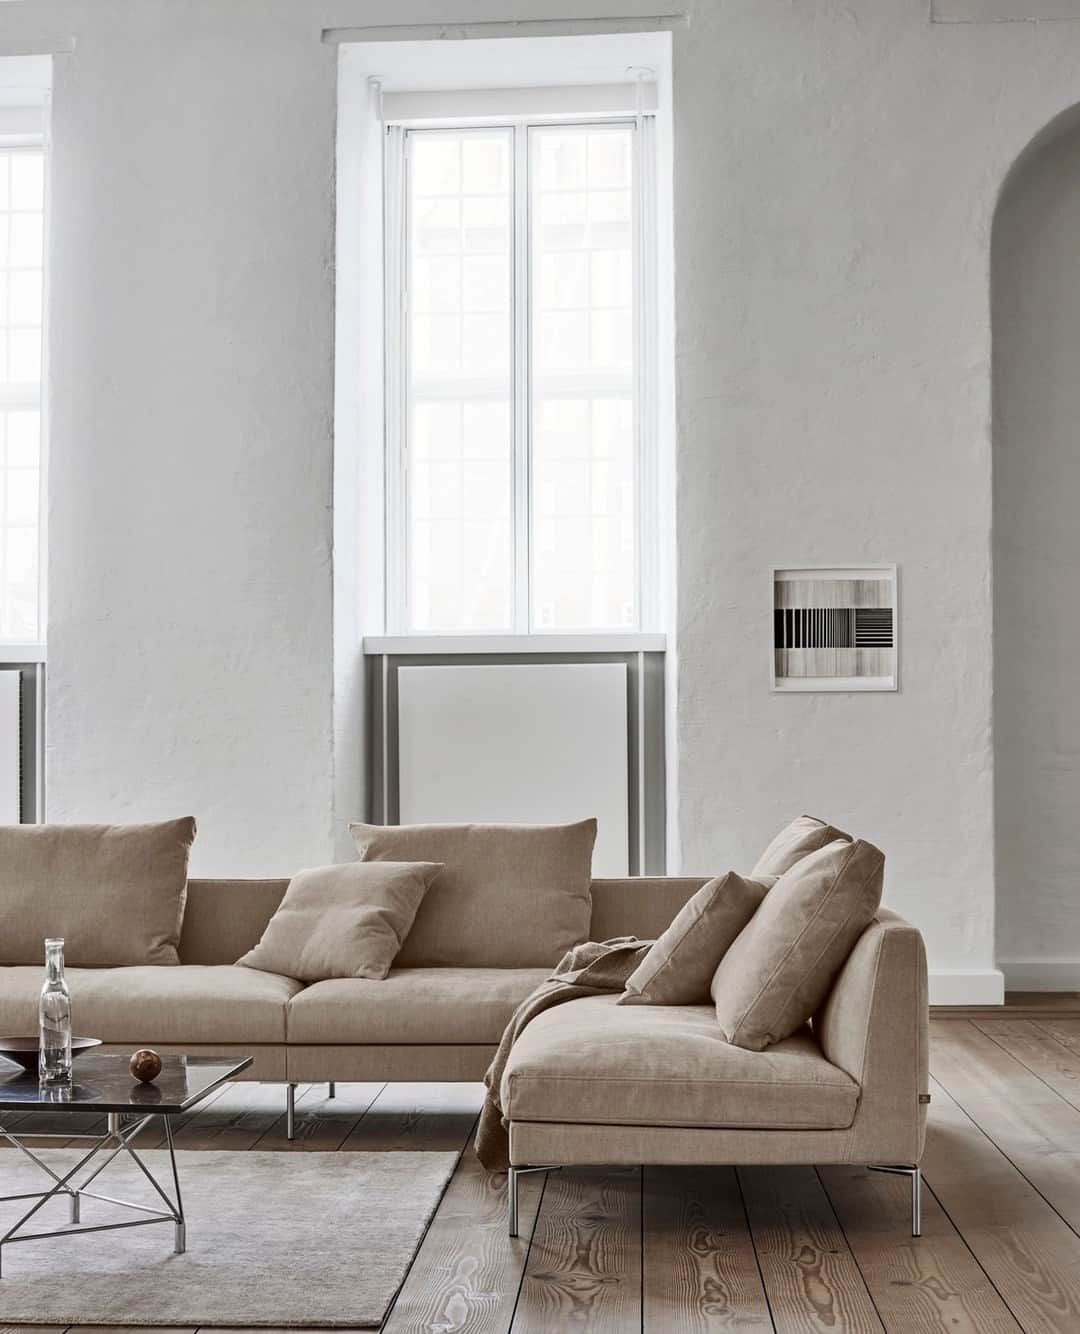 eilersenのインスタグラム：「“Ra is not a lounge sofa, it is a sofa that is well-mannered. It has an international feel to it and has a lovely arm that encases the sofa – not too thick and not too thin, but just right for many years to come,” explains Designer Jens Juul Eilersen. ⁠ ⁠ Sofa: RA upholstered in Level 37⁠ Designer: Jens Juul Eilersen⁠ Table: Spider designed by Andreas Hansen⁠ ⁠ ⁠ ⁠ #eilersen #eilersenfurniture #myeilersen #enjoyaneilersen #RA #jensjuuleilersen  #homedecor #sofa #danishdesign #inredning #finahem #interiorlovers #interiordesign #modernliving #minimalism #nordiskehjem #nordicinspiration #nordicliving #craftsmanship #boligindretning #designinterior #livingroominspo #boliginspiration  #hemindredning #schönerwohnen #nordicminimalism #designinspiration #throughgenerations」